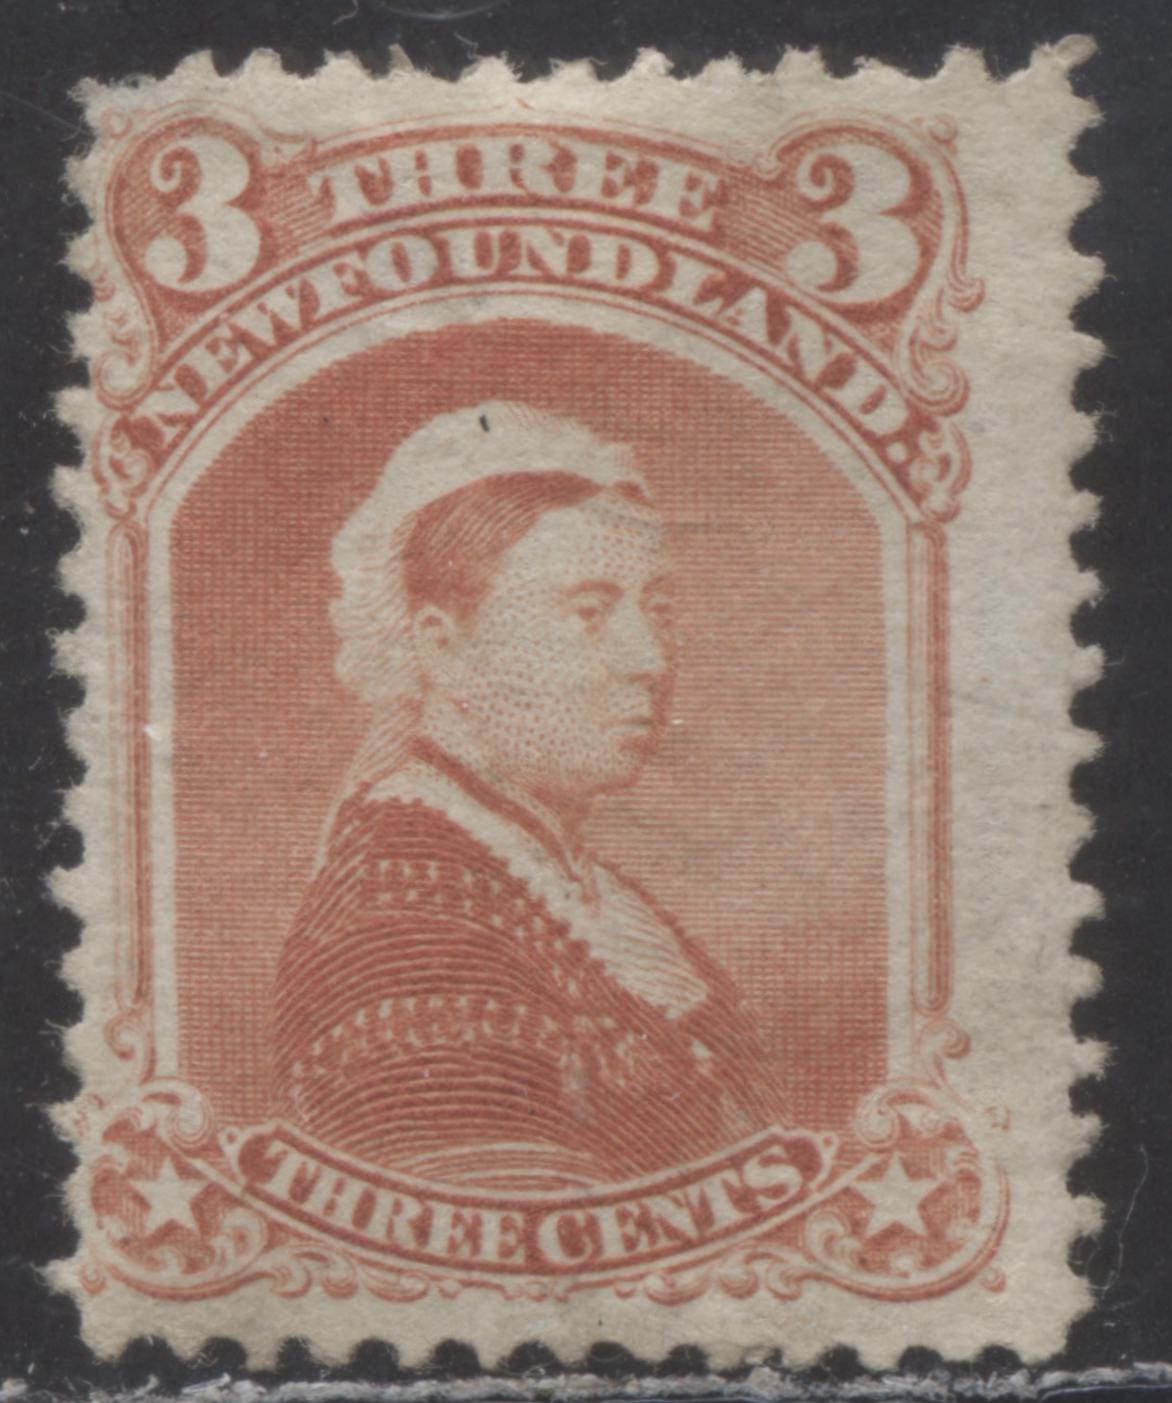 Lot 68 Newfoundland #33 3c Vermilion Queen Victoria, 1868 - 1894 Second Cents Issue, A VG Unused Single Perf 12.1 x 12, Pulled UL Corner Perf